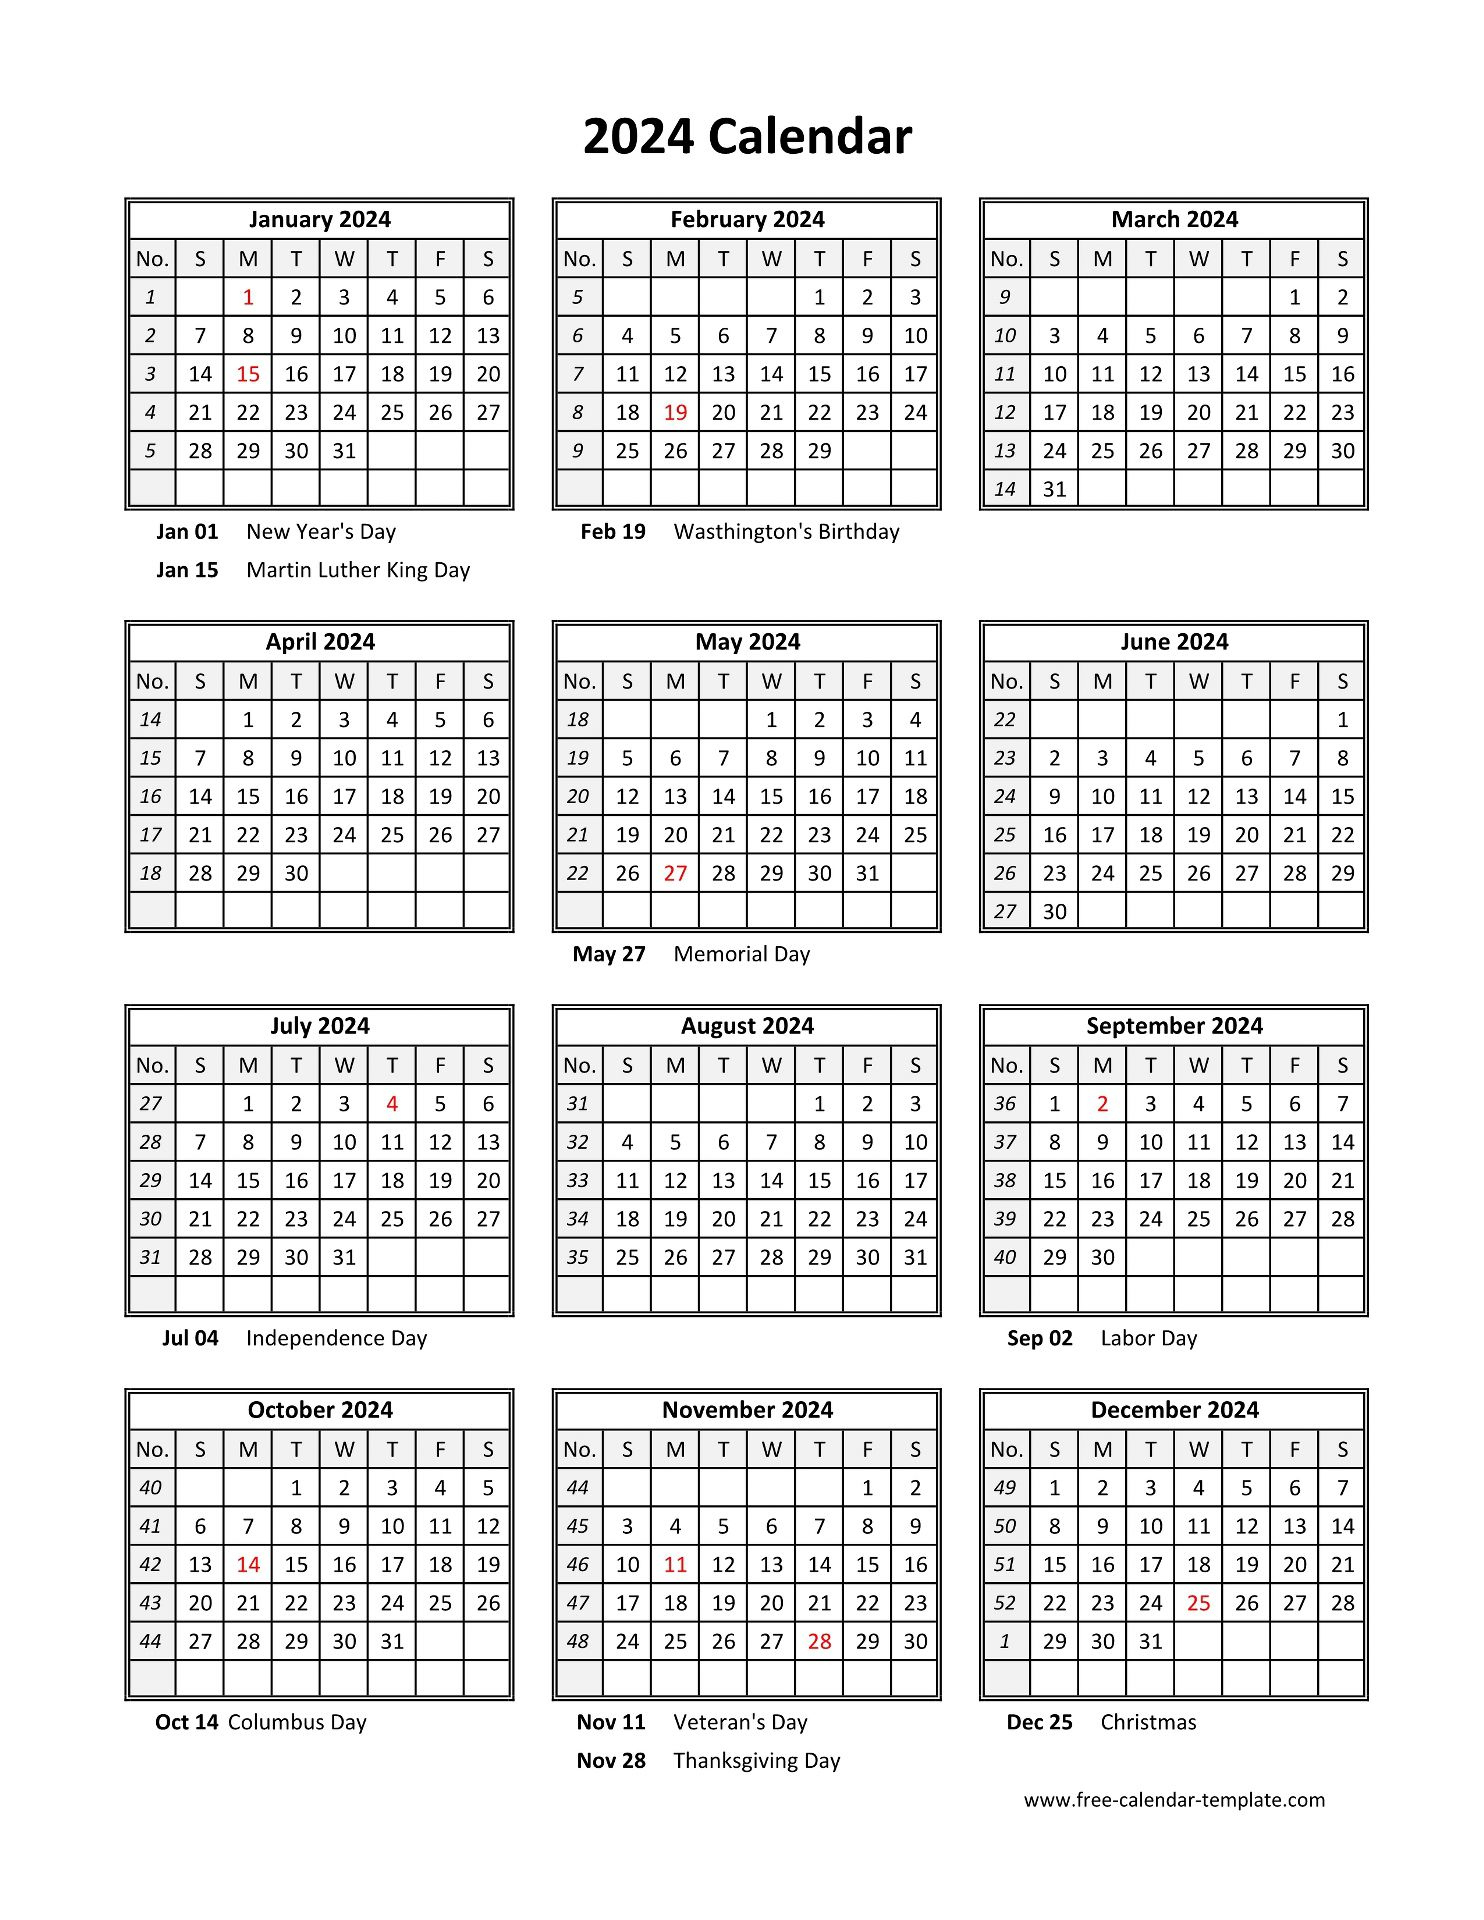 Yearly Printable Calendar 2024 With Holidays | Free-Calendar | 2024 Yearly Calendar Printable Pdf